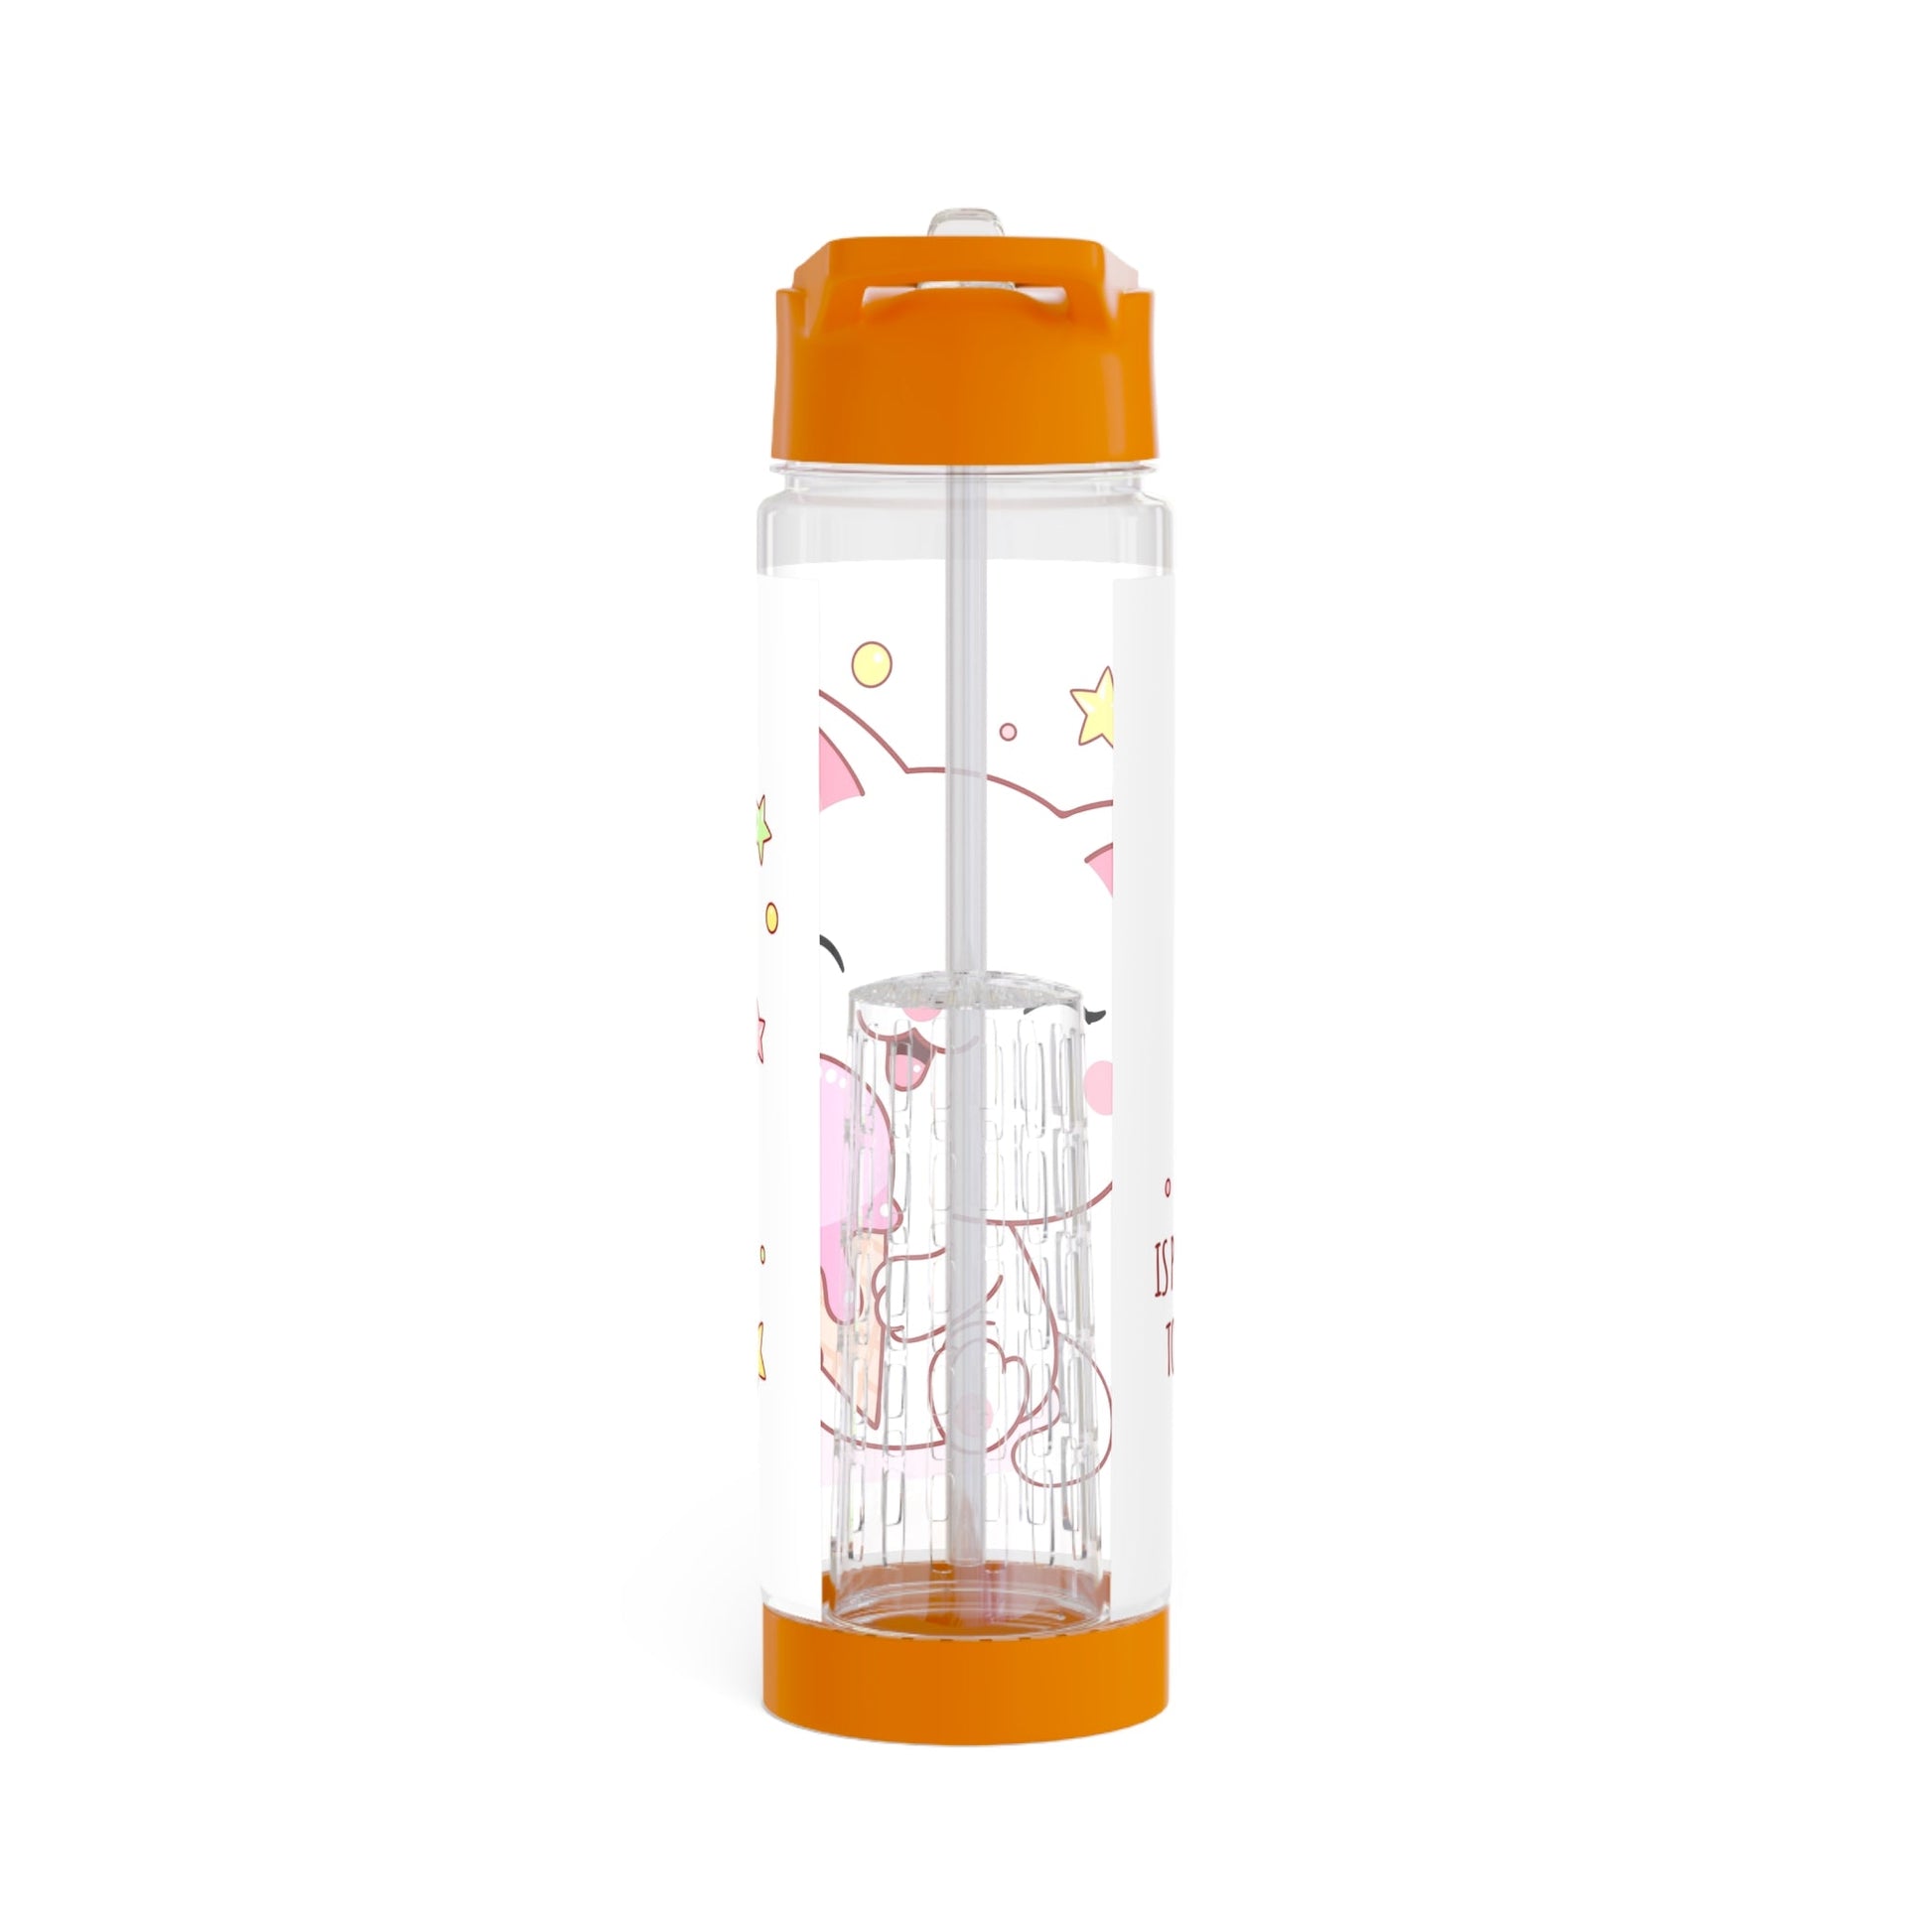 This is a Good Day Infuser Water Bottle - T4x Quadruple Love